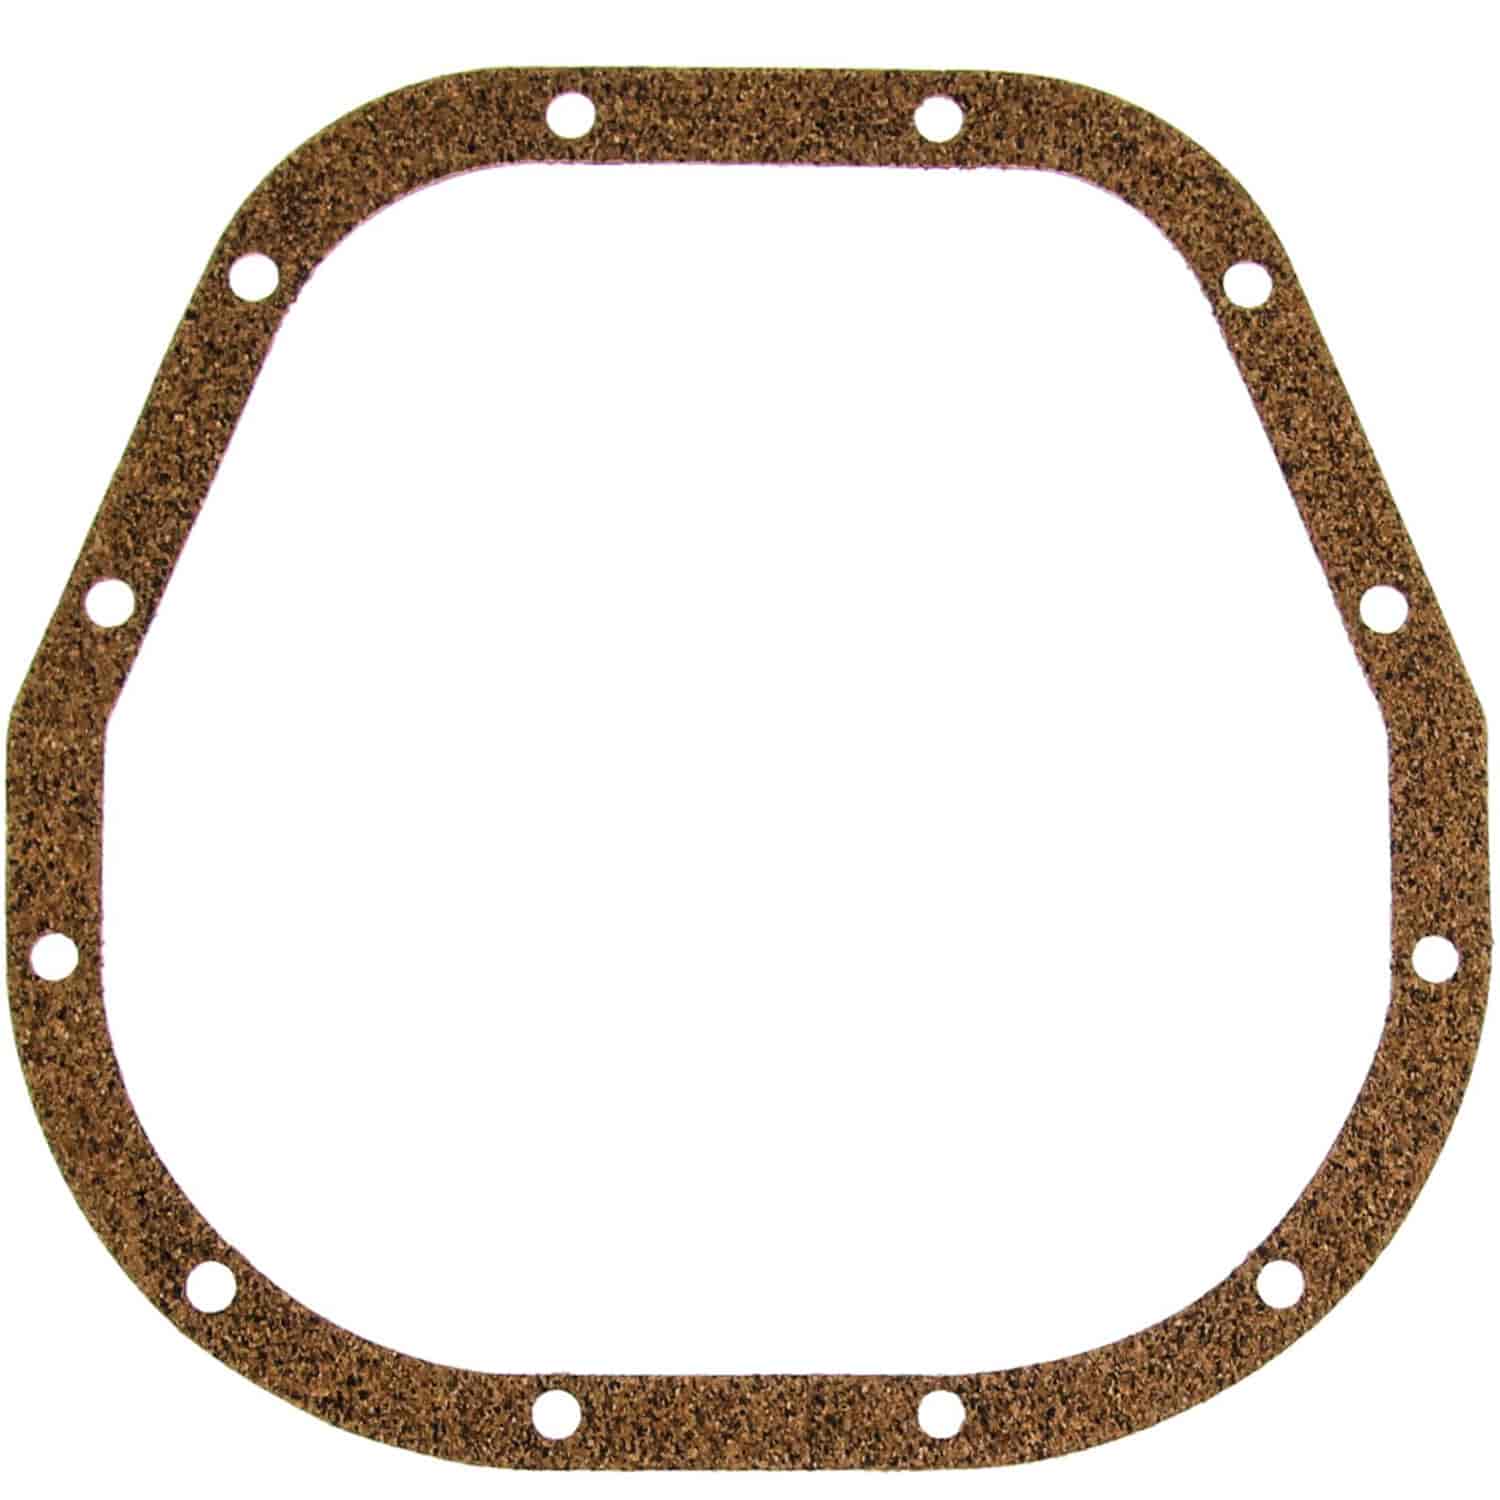 Differential Carrier Gasket 1985-2014 Ford Trucks with 10.25" Gear